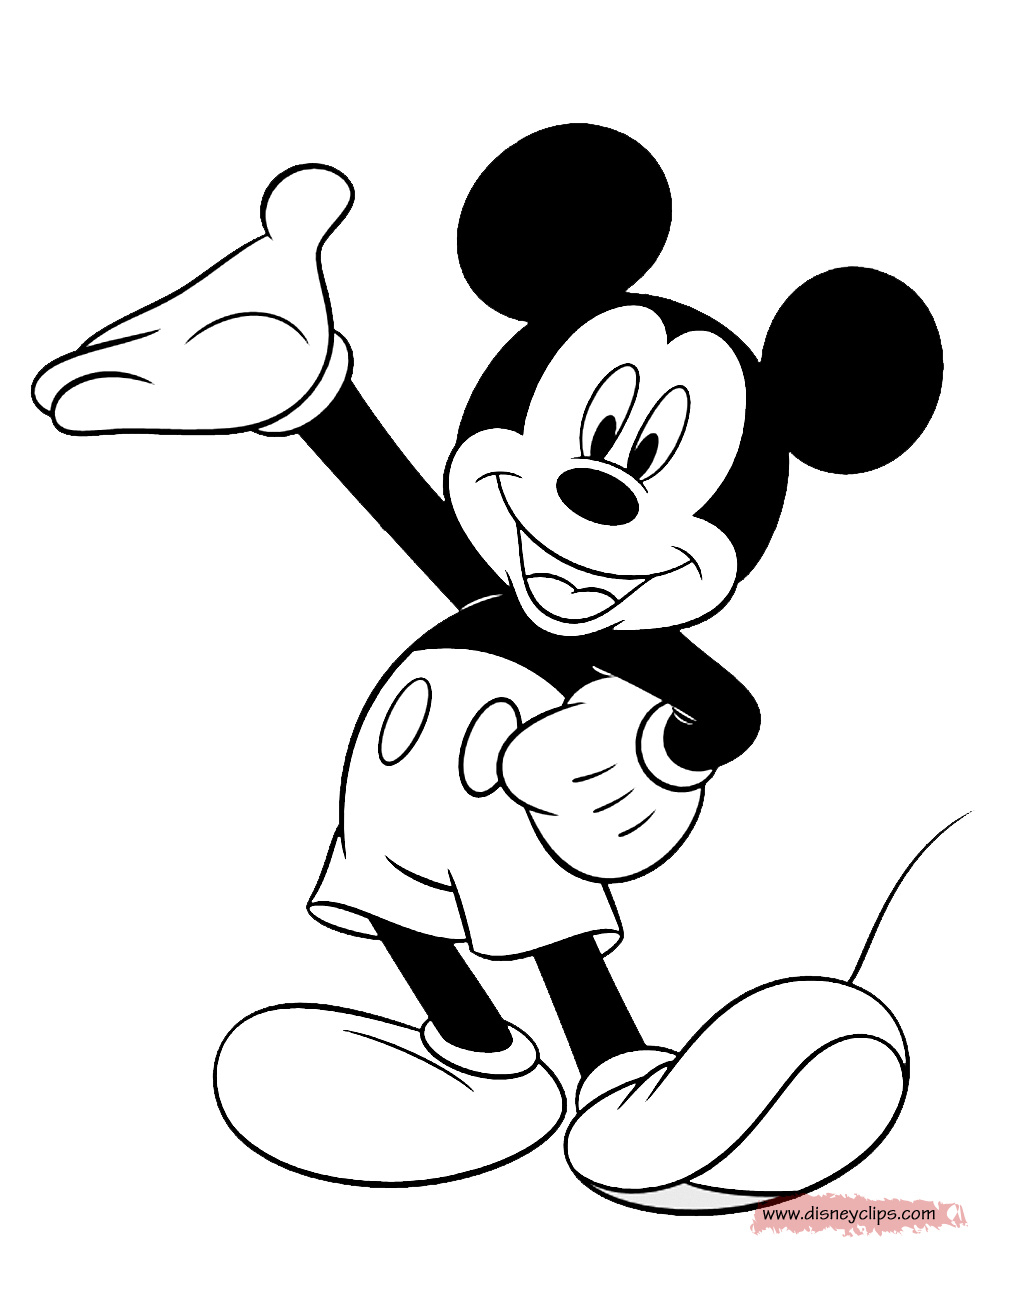 Mickey Mouse Coloring Page Mickey Mouse Drawing Games At Paintingvalley Explore